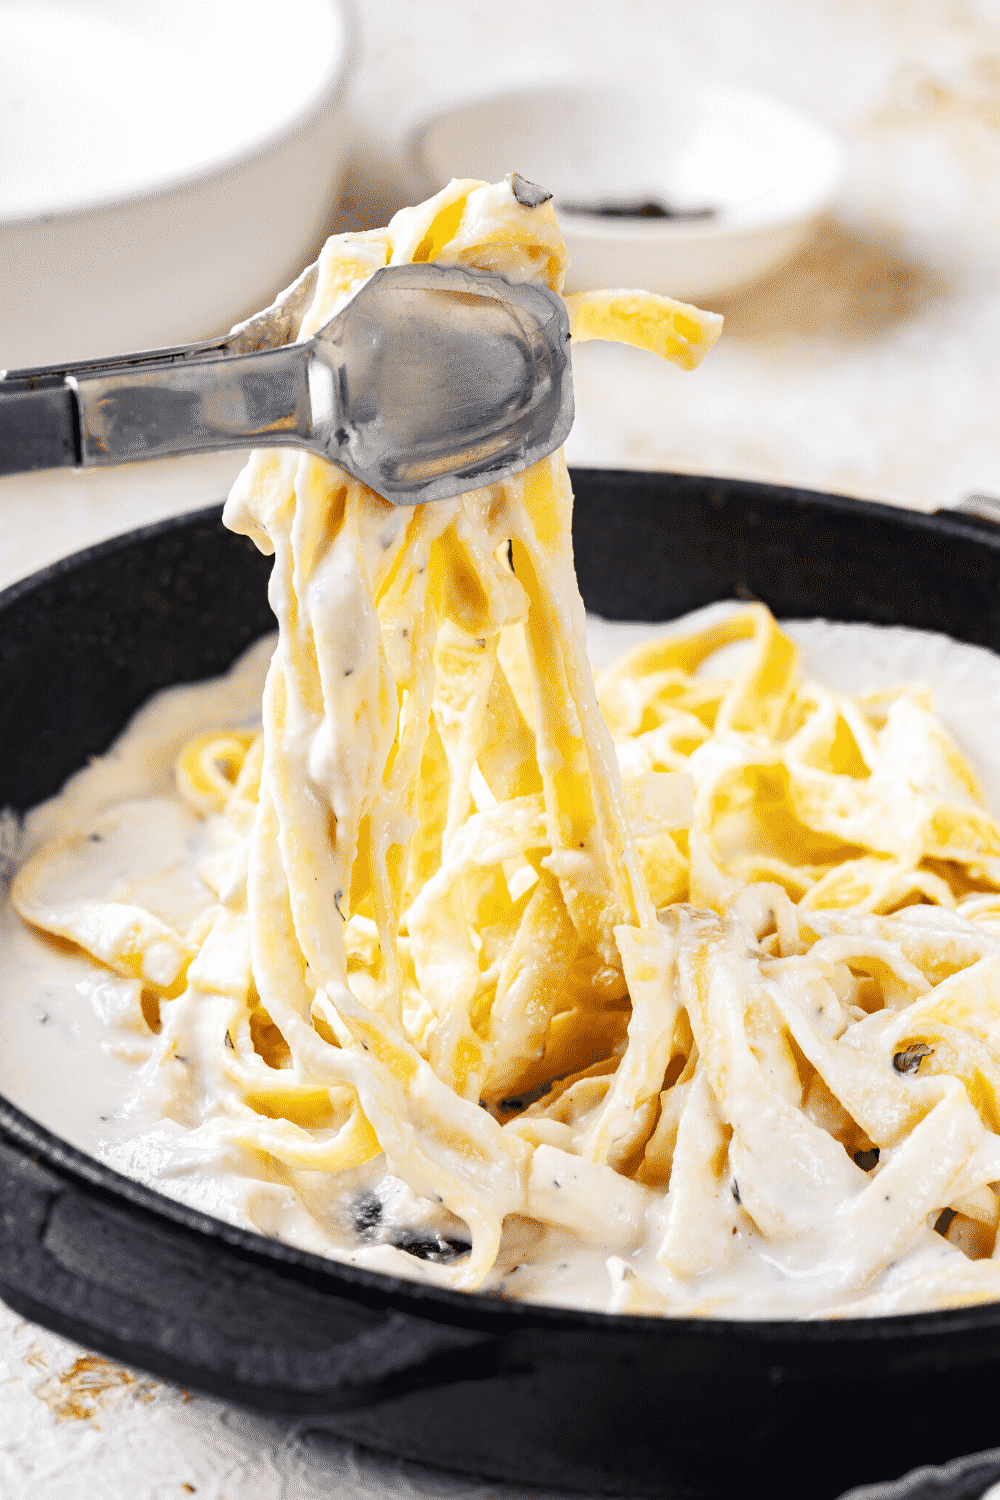 A black pan filled with fettuccine Alfredo. Tongs are hovering over the pan with fettuccine noodles between them draped down into the pan.